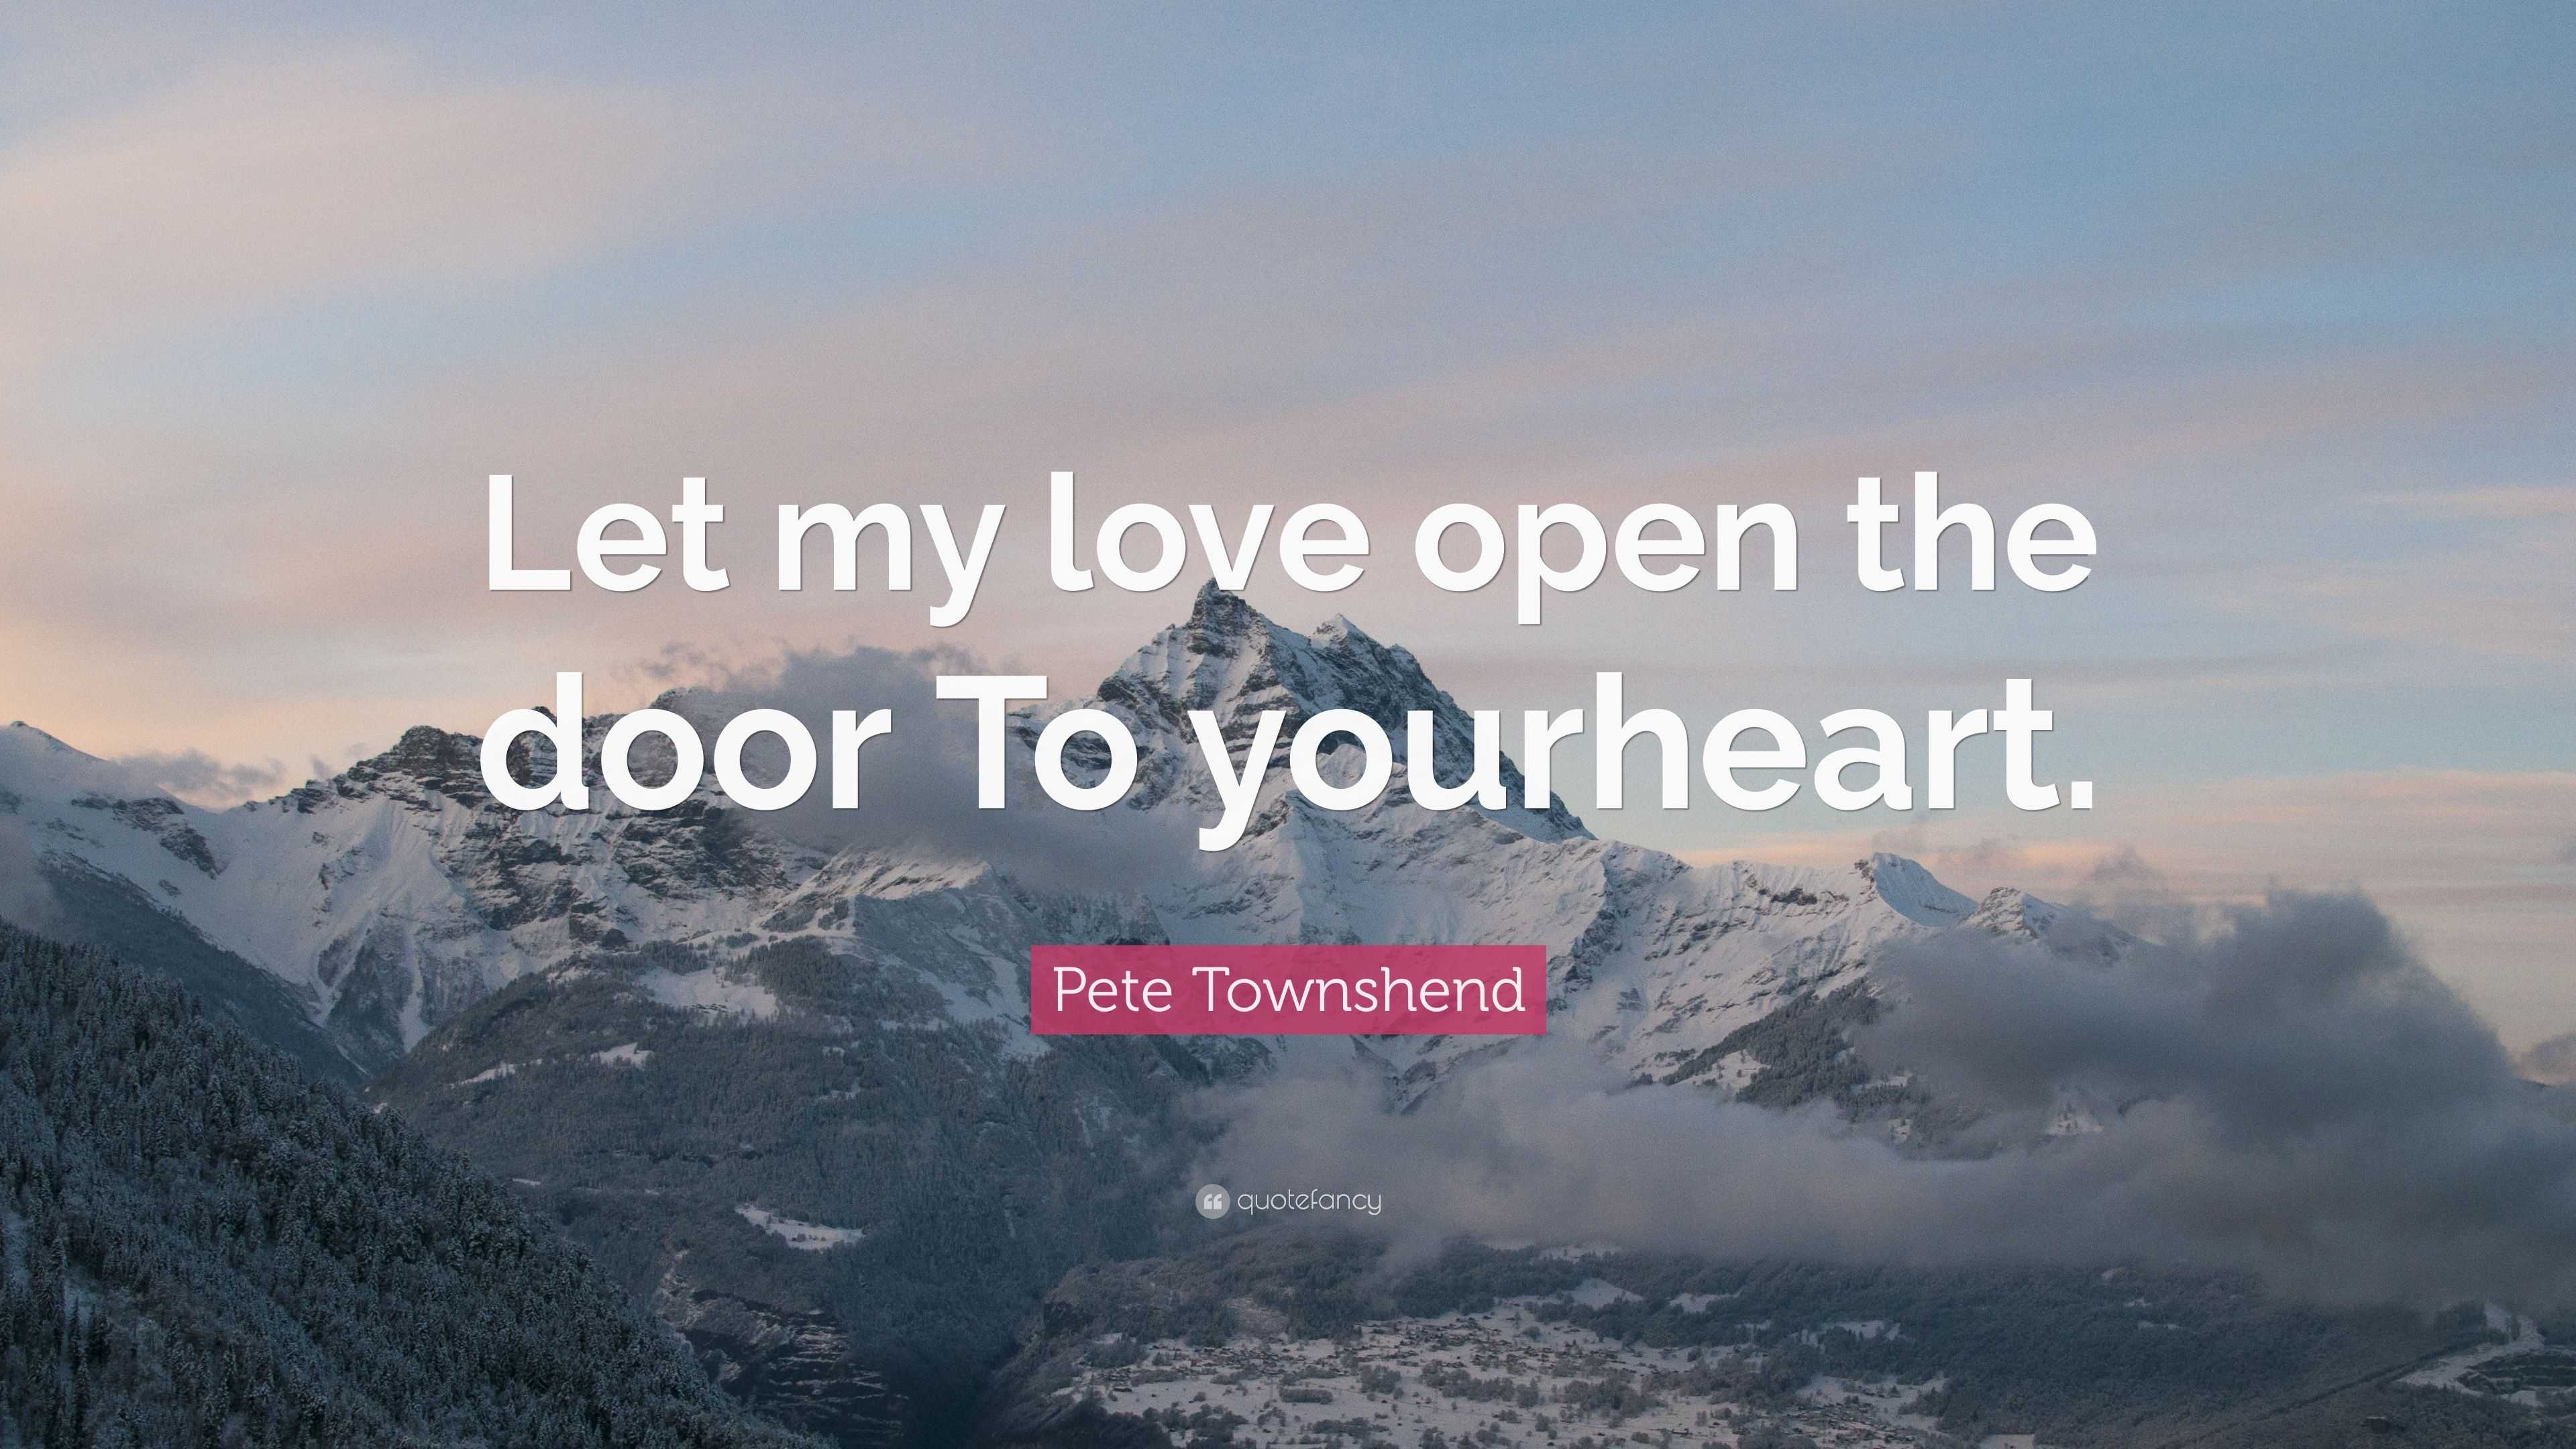 Pete Townshend Quote “Let my love open the door To yourheart ”